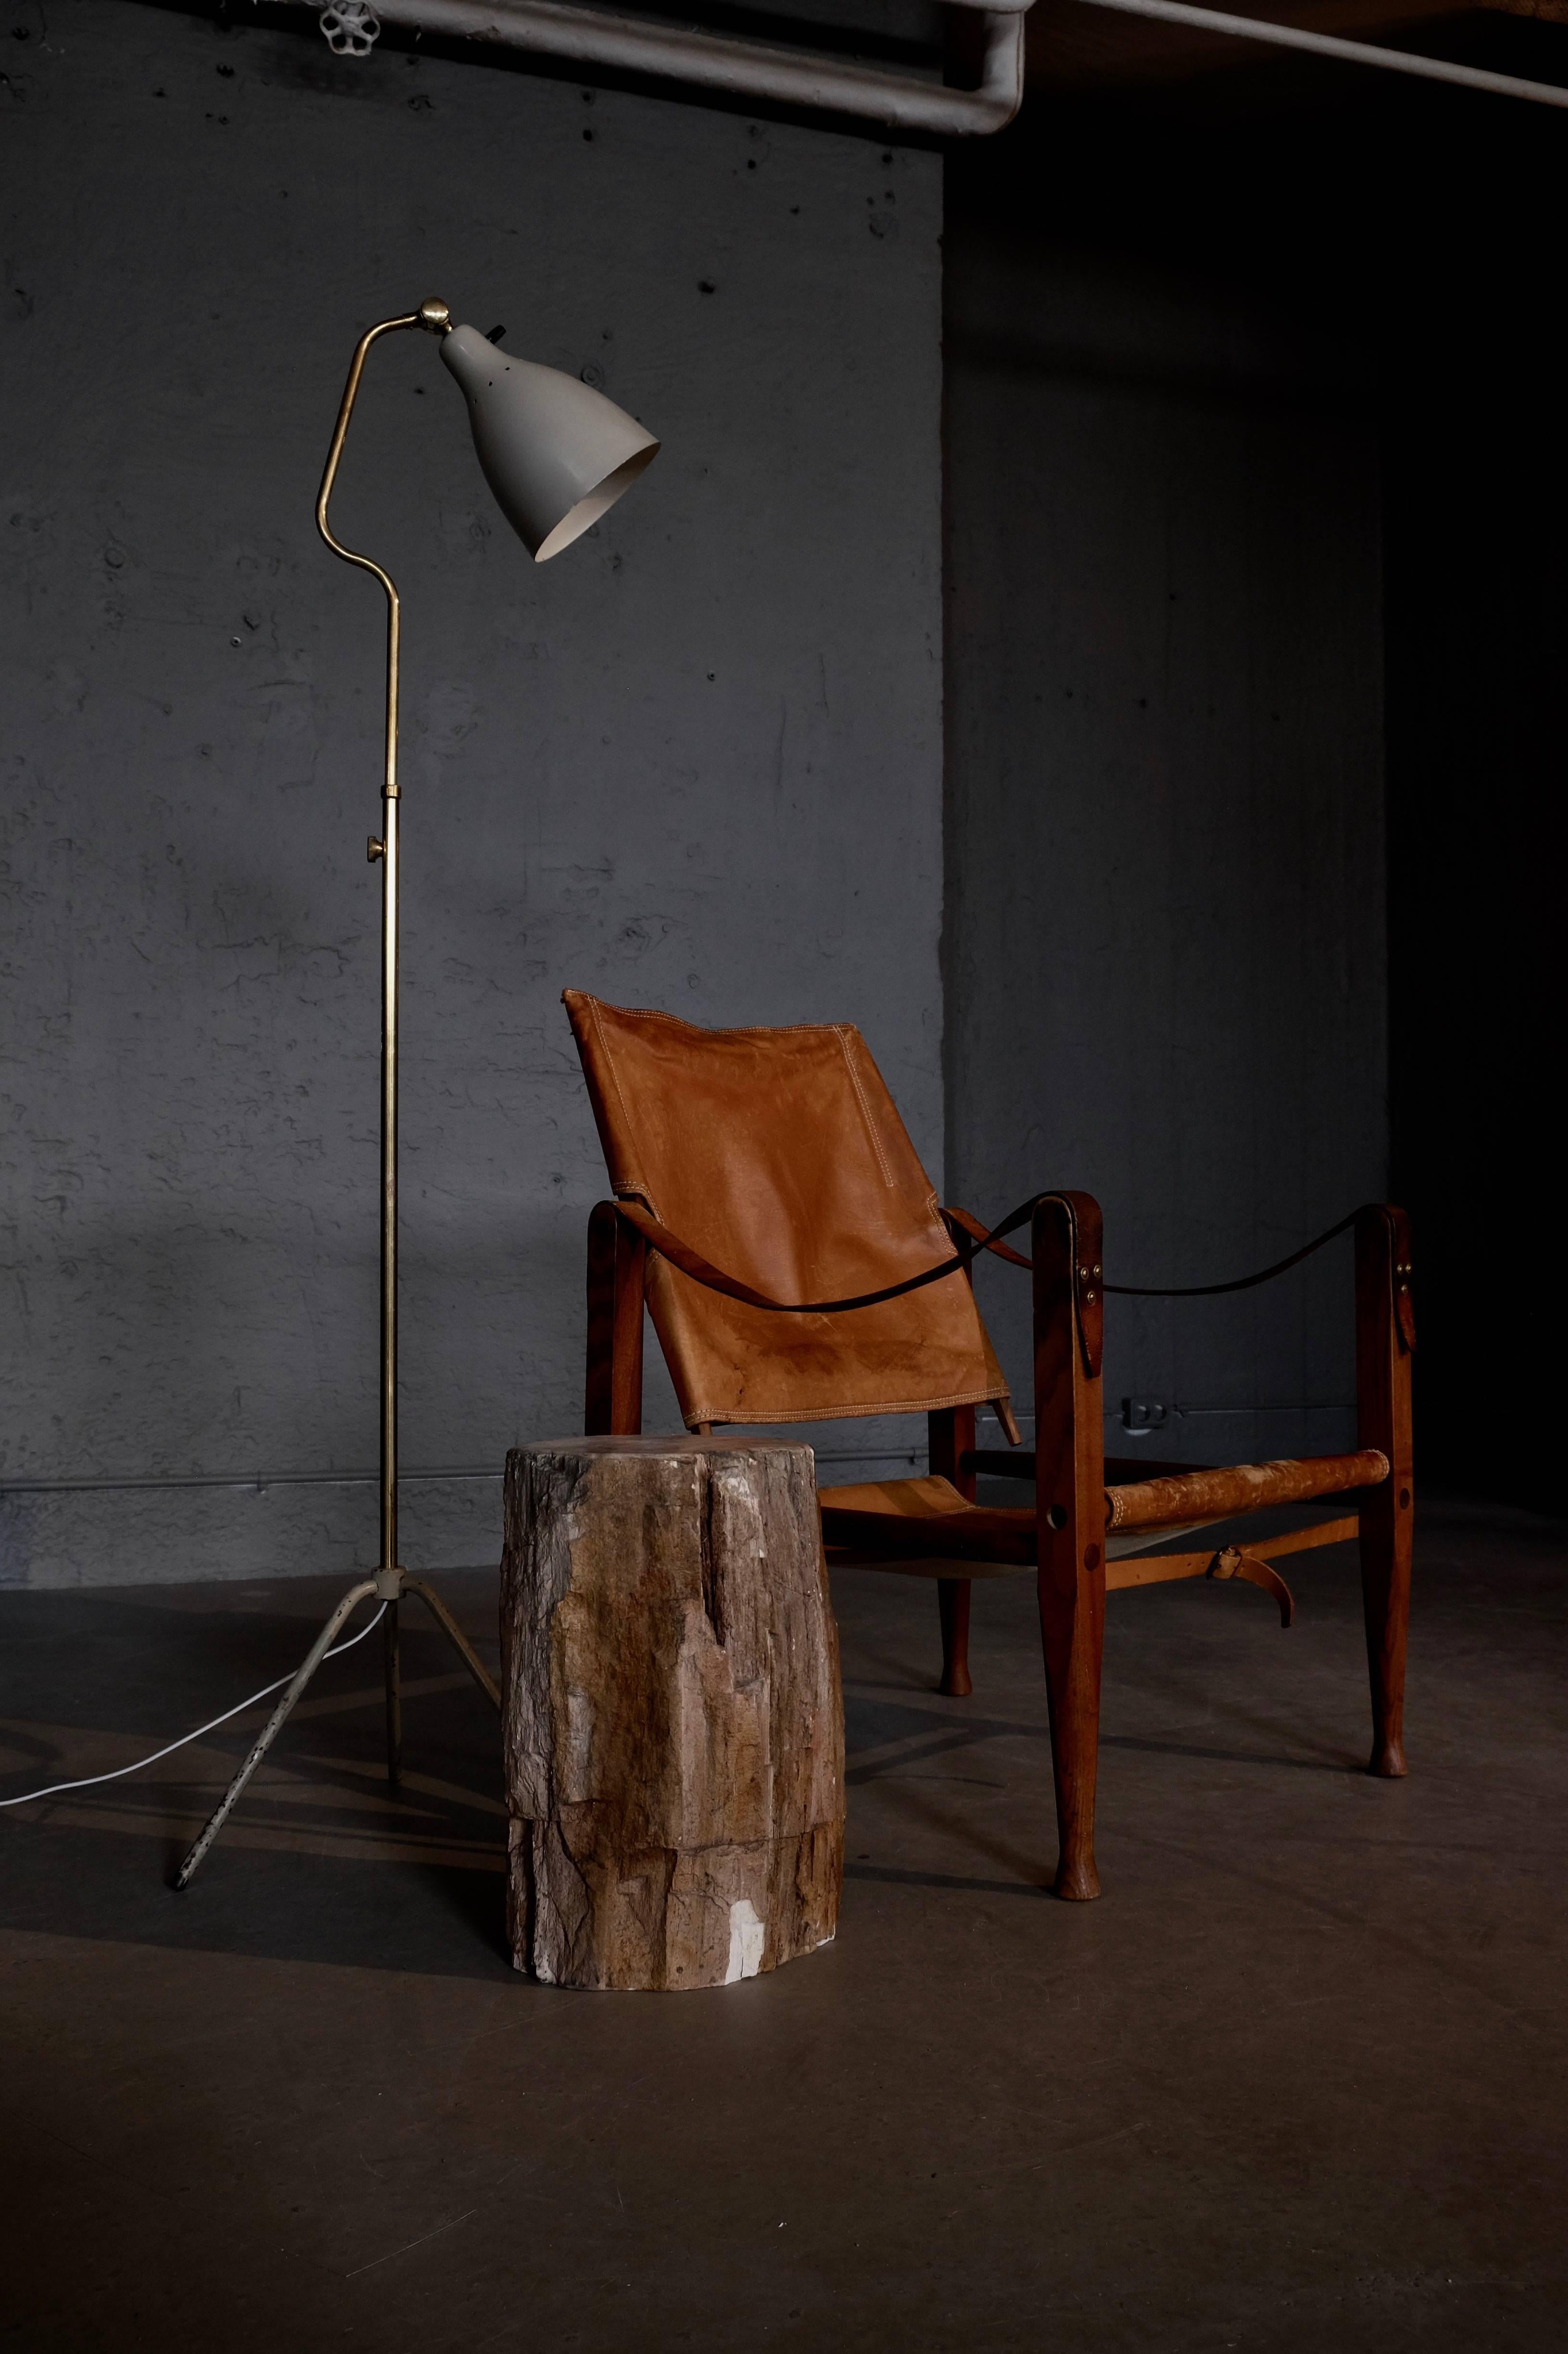 Safari chair with patinated cognac brown leather. Designed by Kaare Klint in 1933, produced by Rud. Rasmussen, Denmark.
Global front door shipping (within 7 days): USD 99.